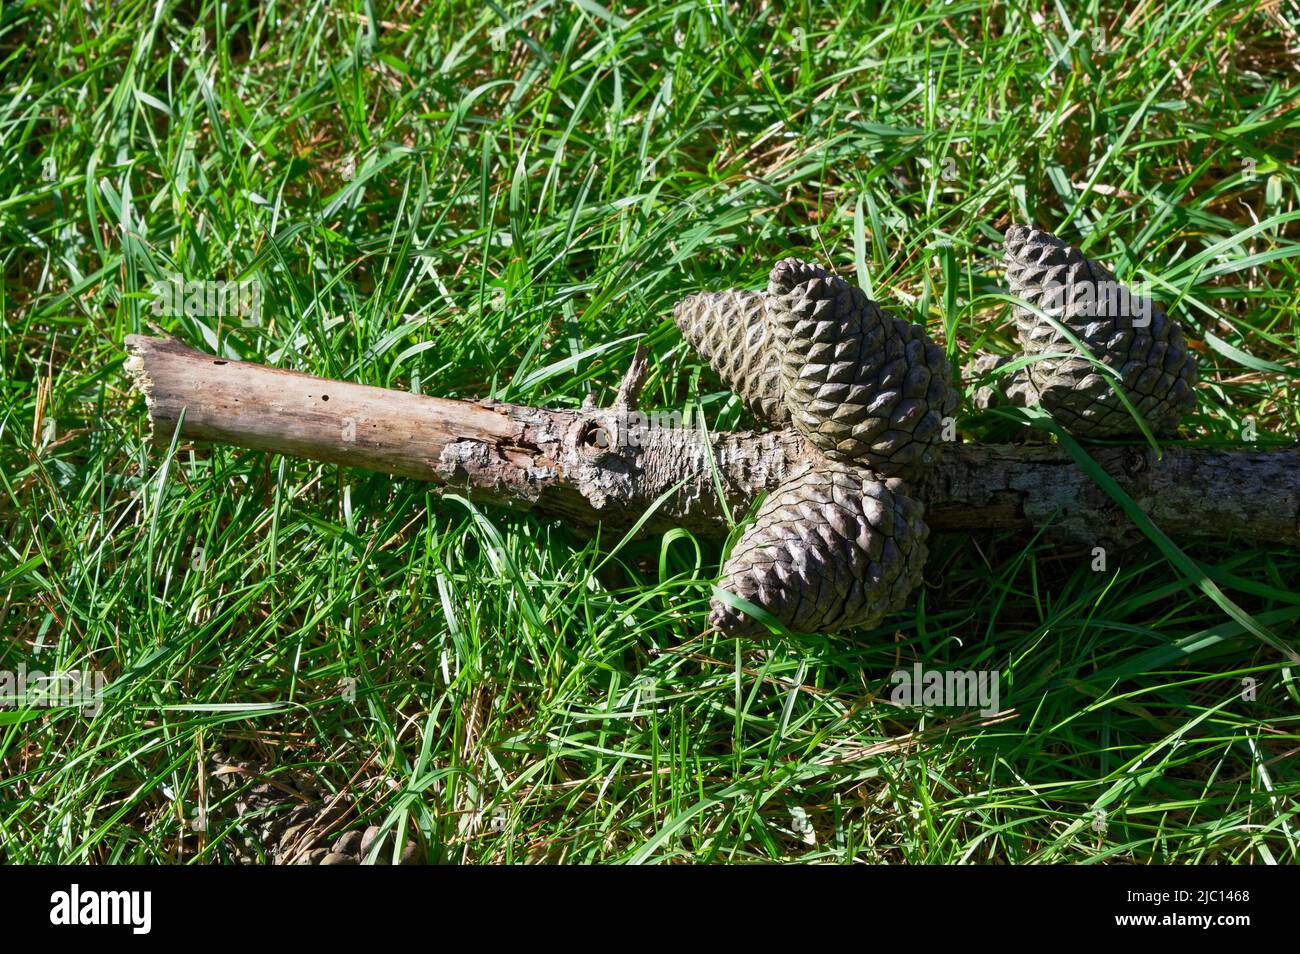 Pine cones have fallen off the tree, they are still attached to their branch and tightly closed. Stock Photo